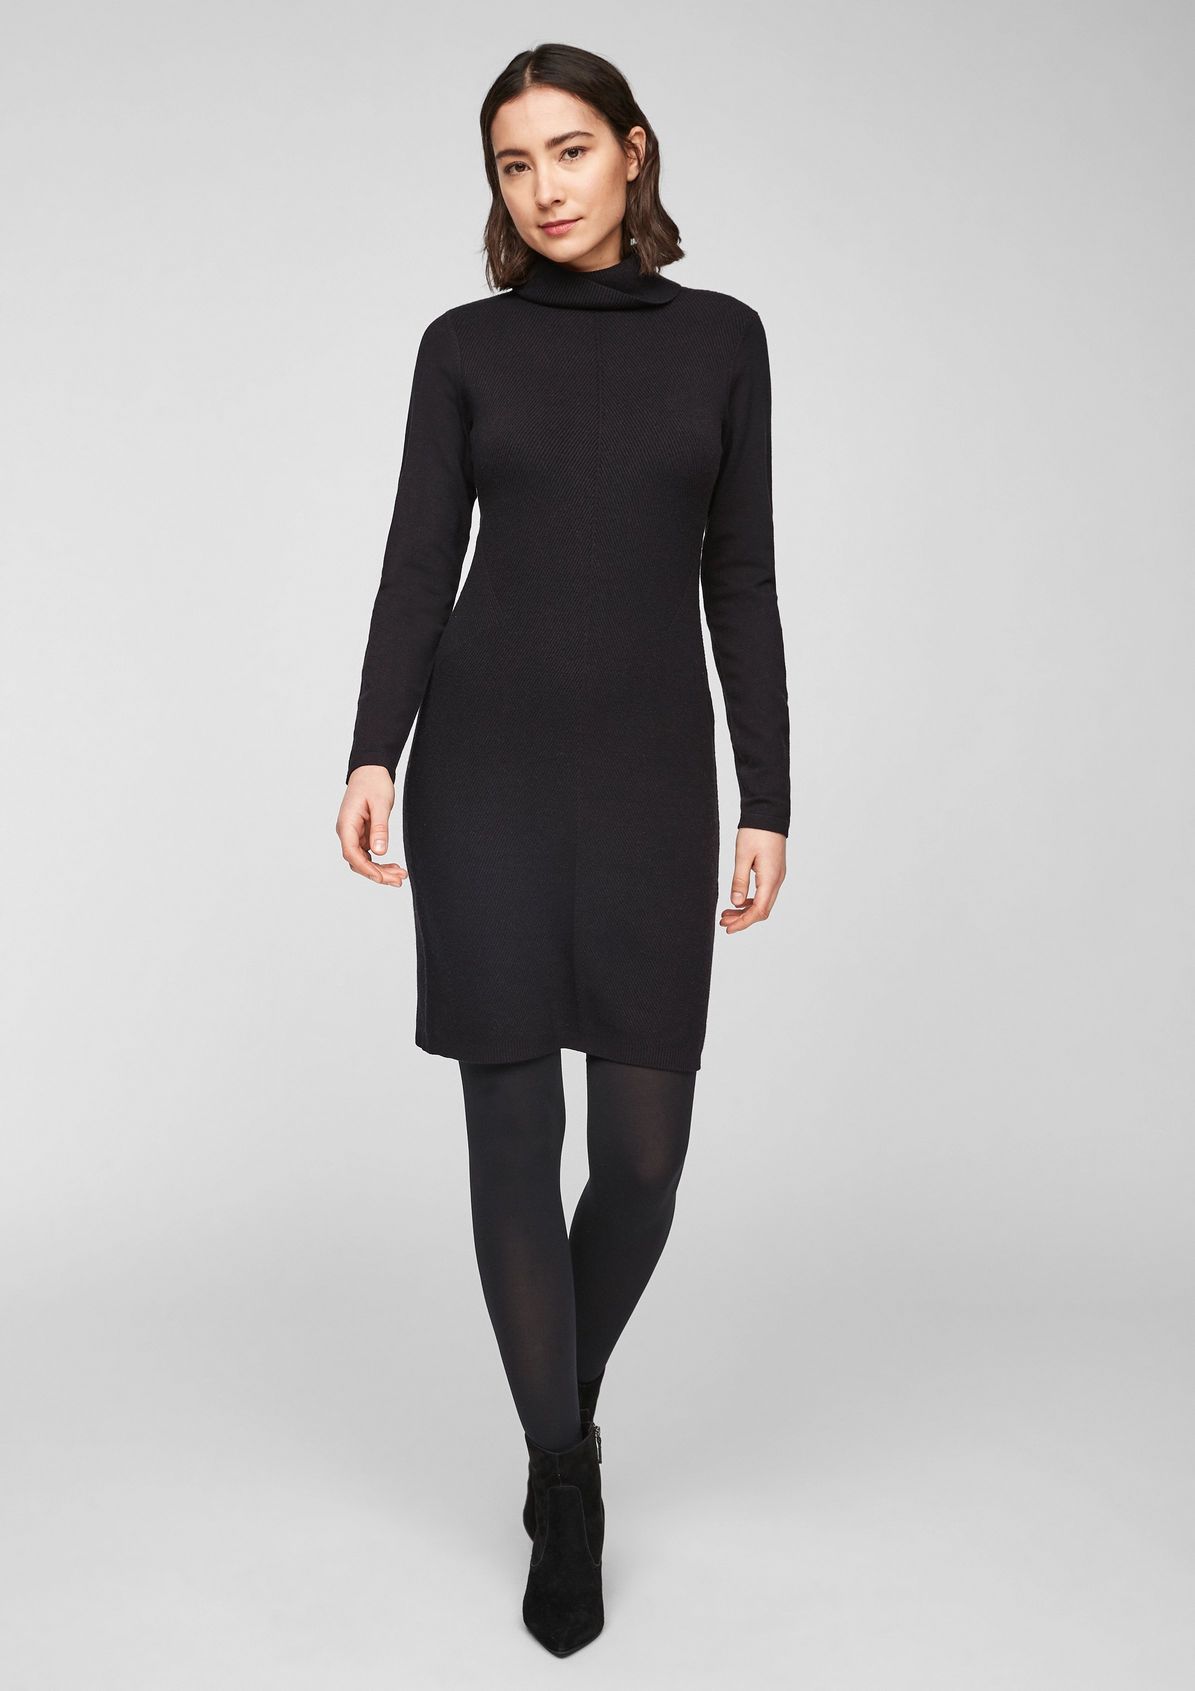 Soft knit dress with a polo neck from comma